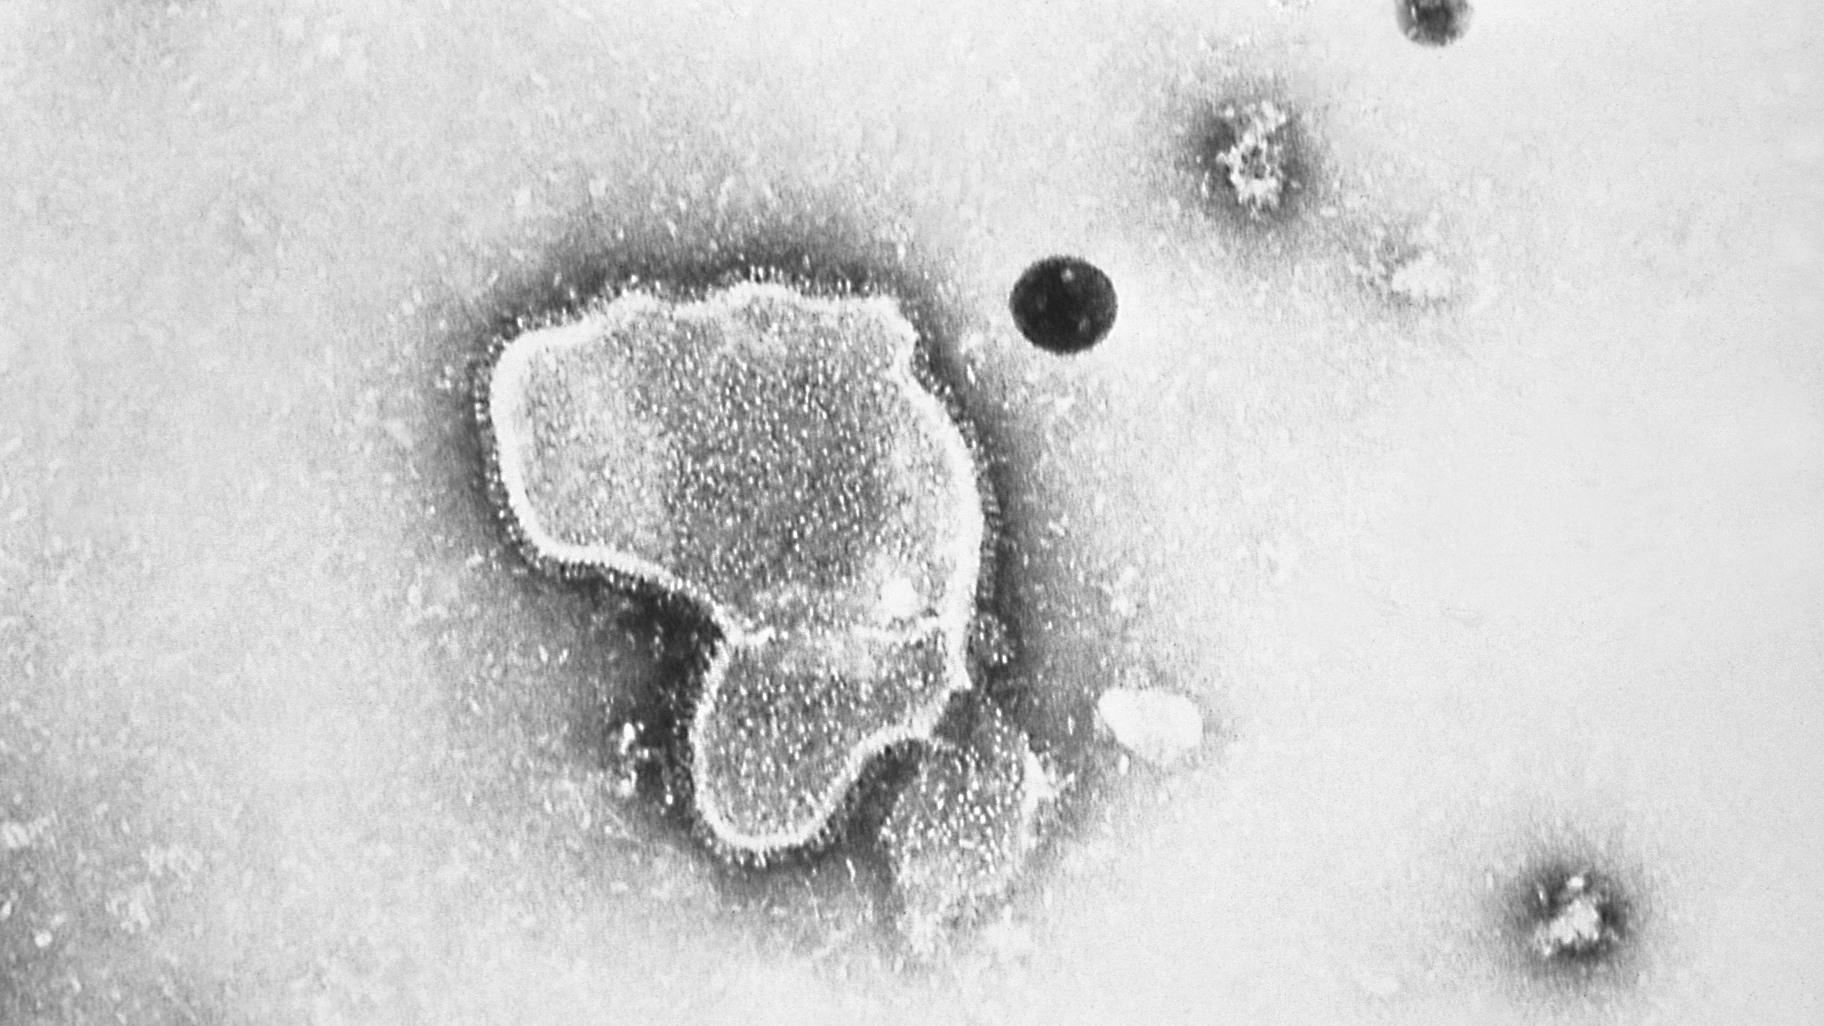 This 1981 photo provided by the Centers for Disease Control and Prevention shows an electron micrograph of Respiratory Syncytial Virus, also known as RSV. (CDC via AP, File)